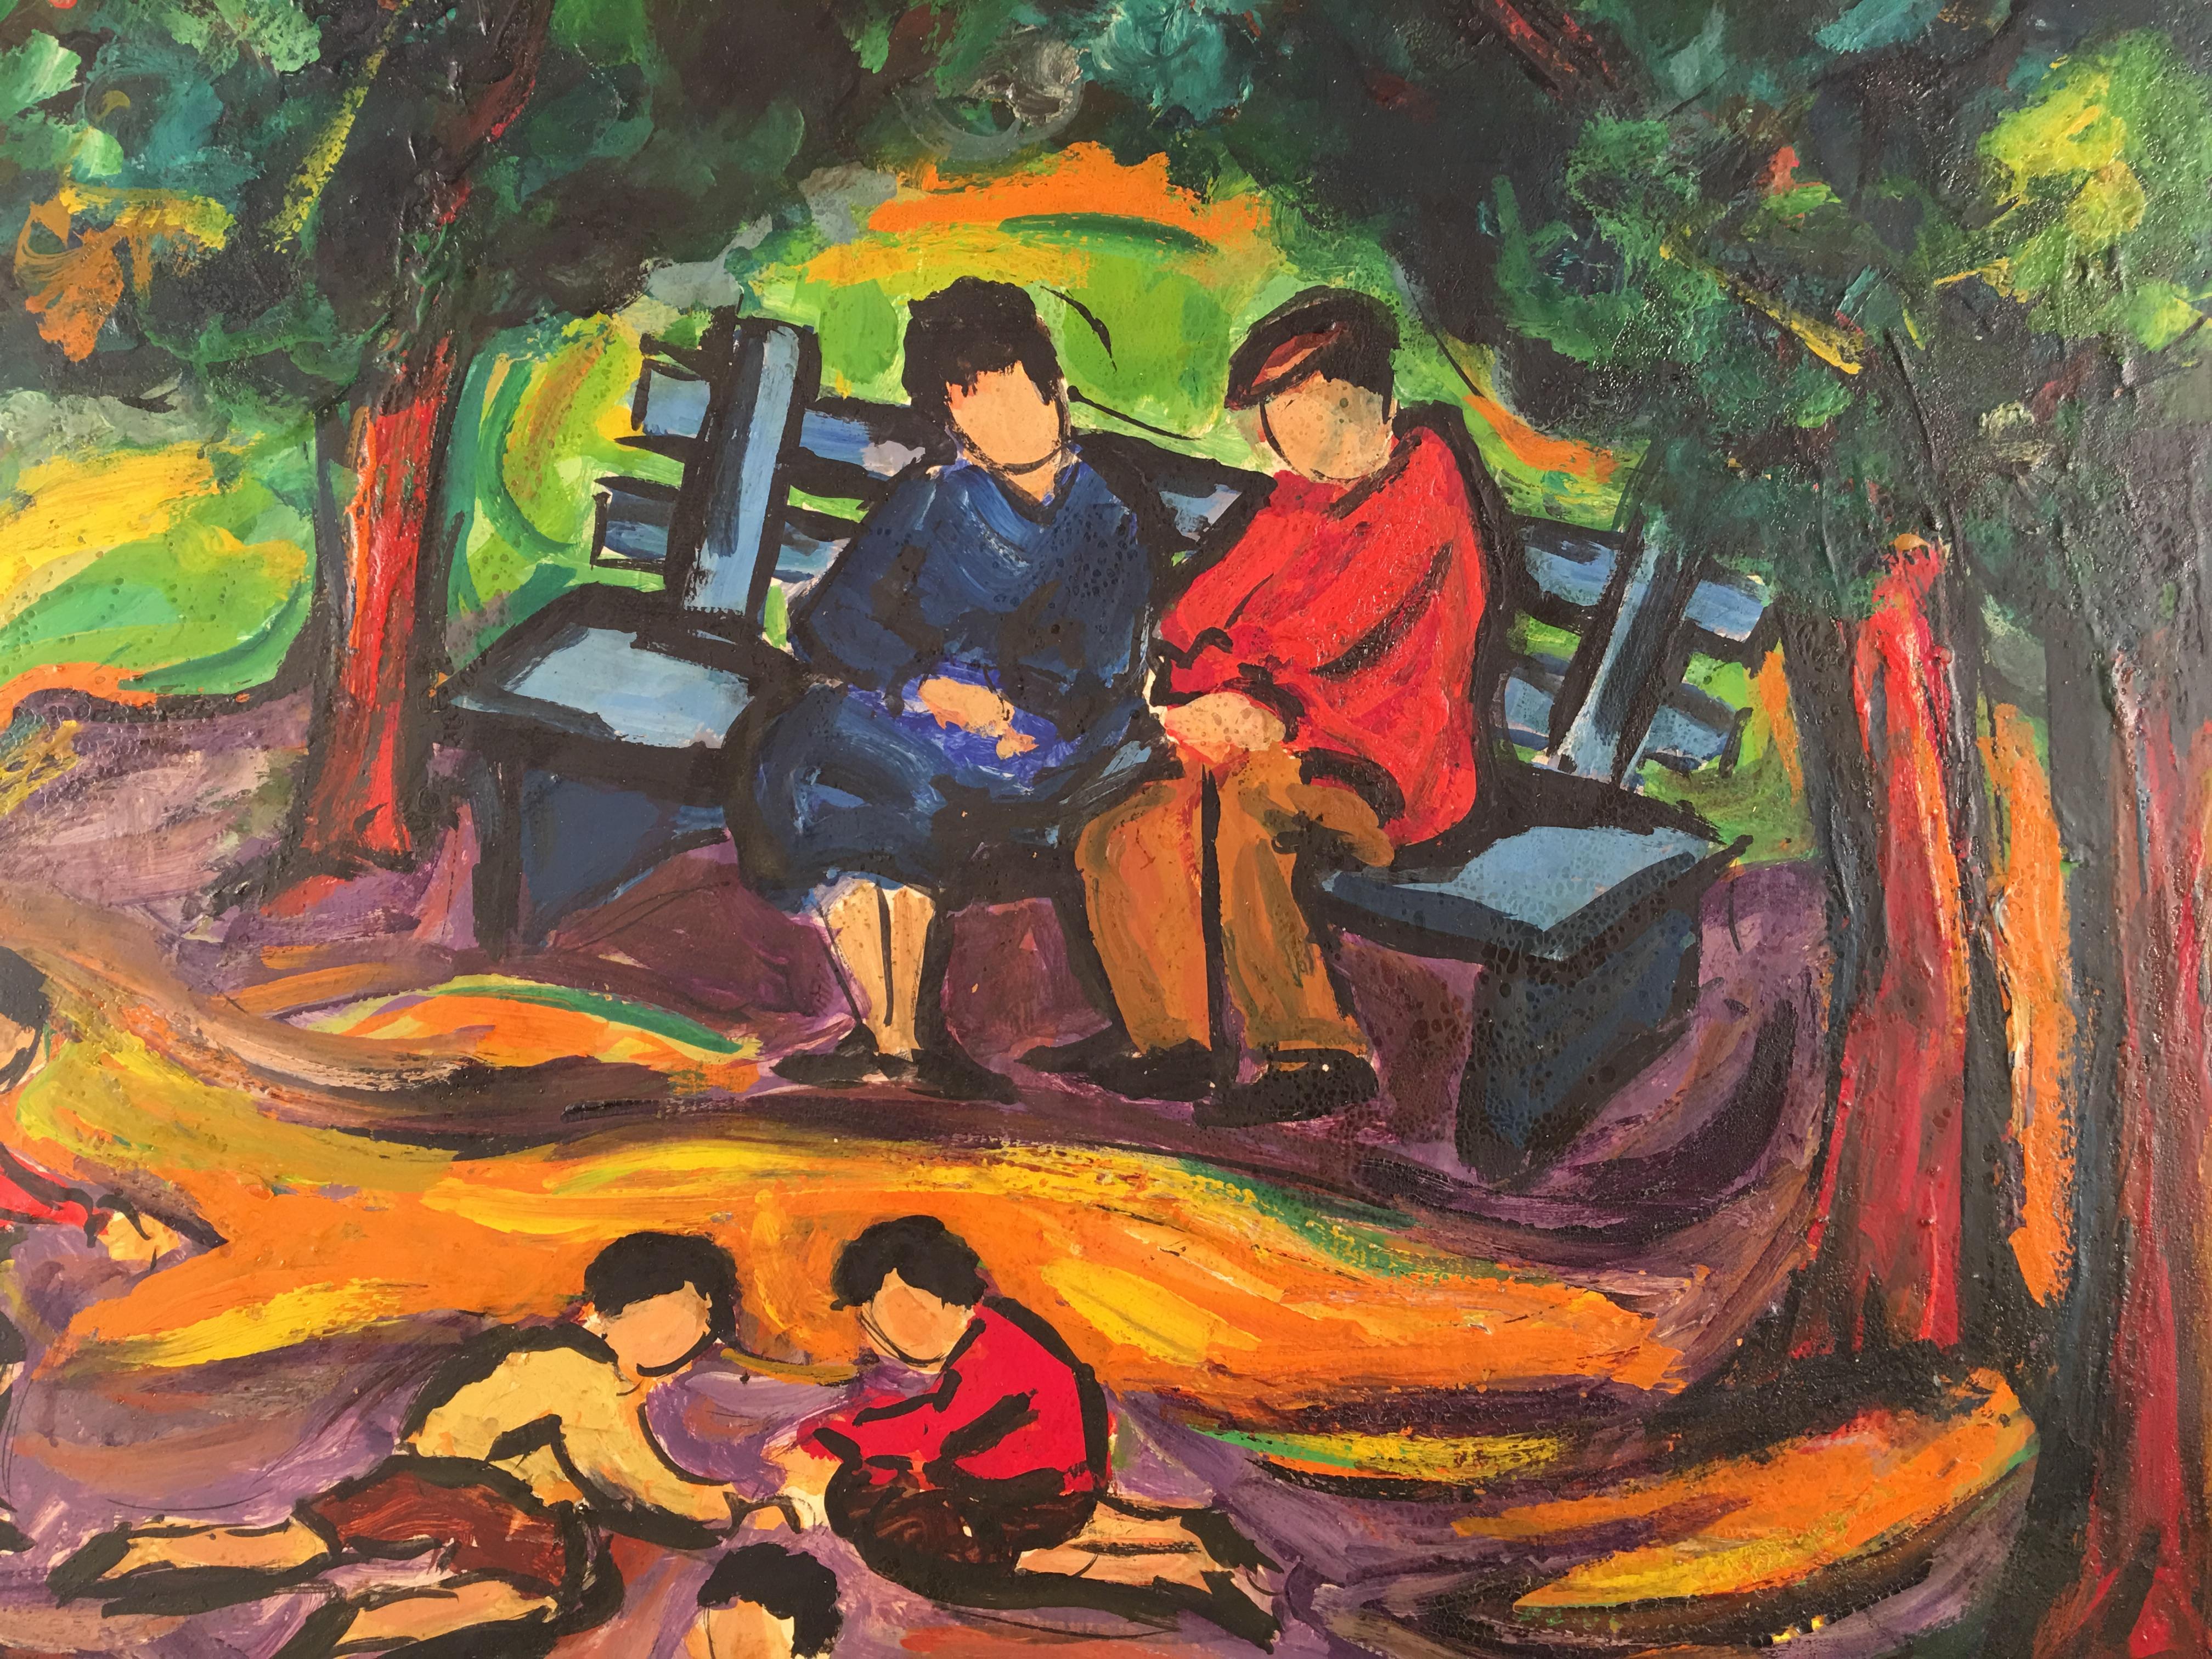 Family Afternoon in Central Park - Expressionist Painting by Maxim Bugzester